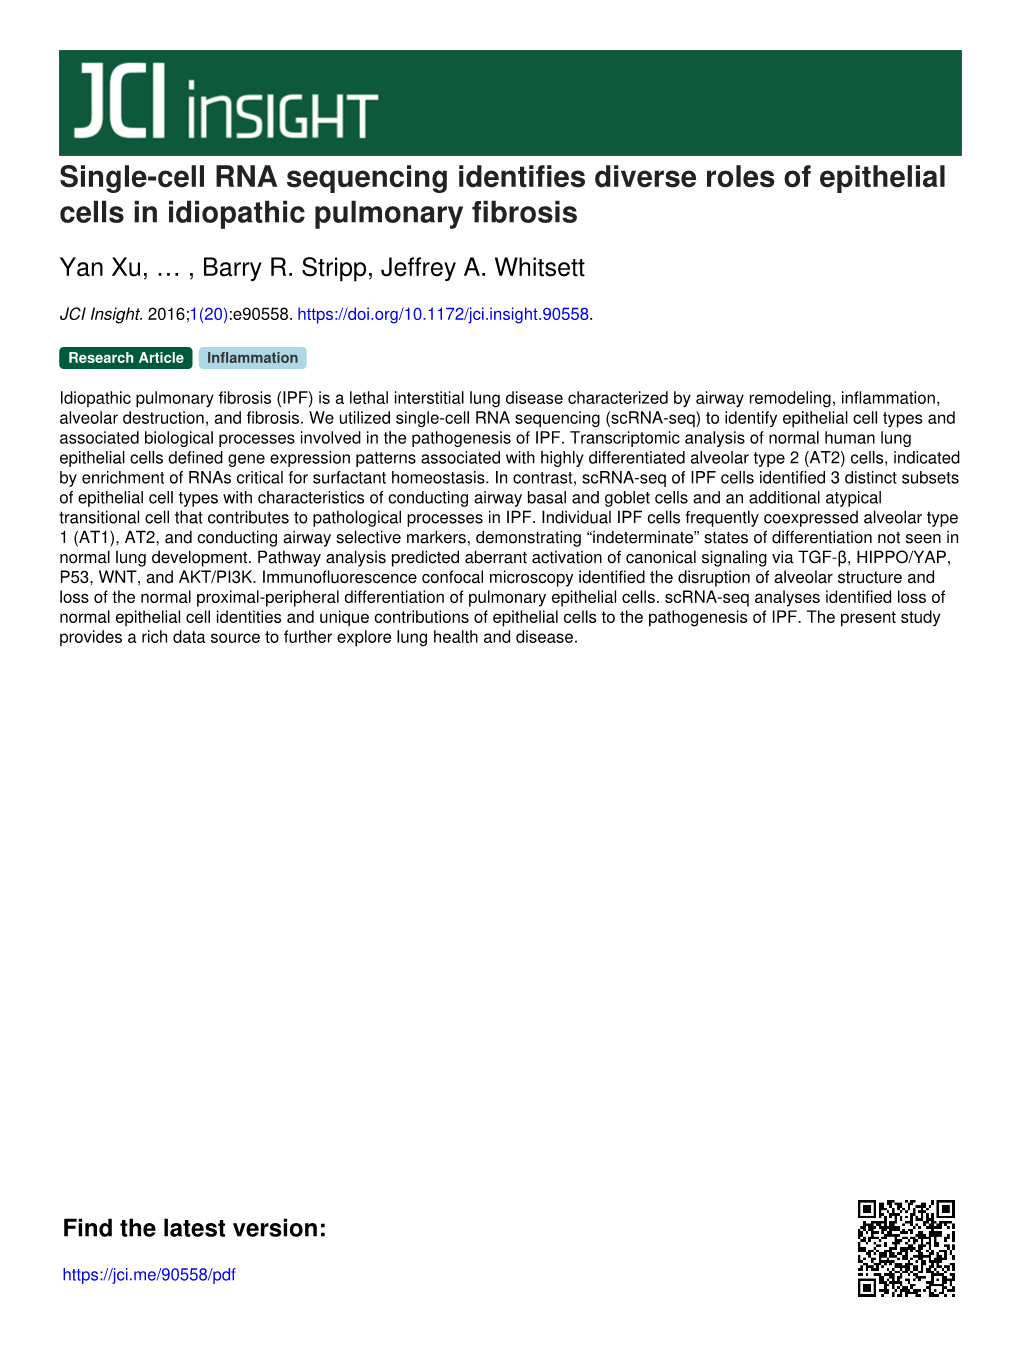 Single-Cell RNA Sequencing Identifies Diverse Roles of Epithelial Cells in Idiopathic Pulmonary Fibrosis